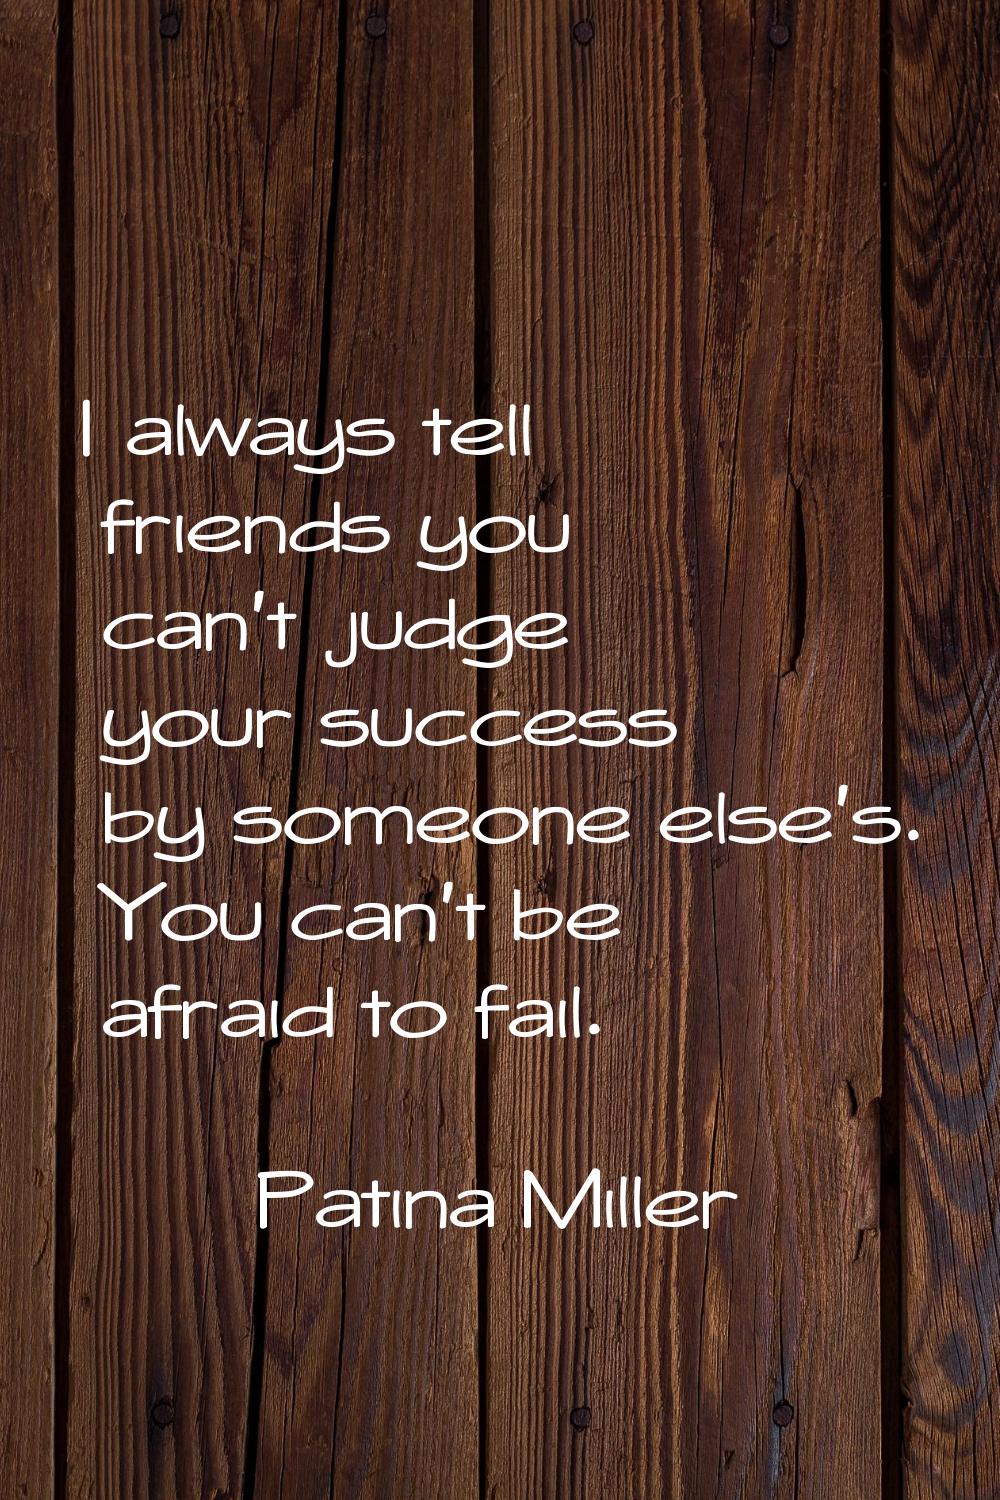 I always tell friends you can't judge your success by someone else's. You can't be afraid to fail.